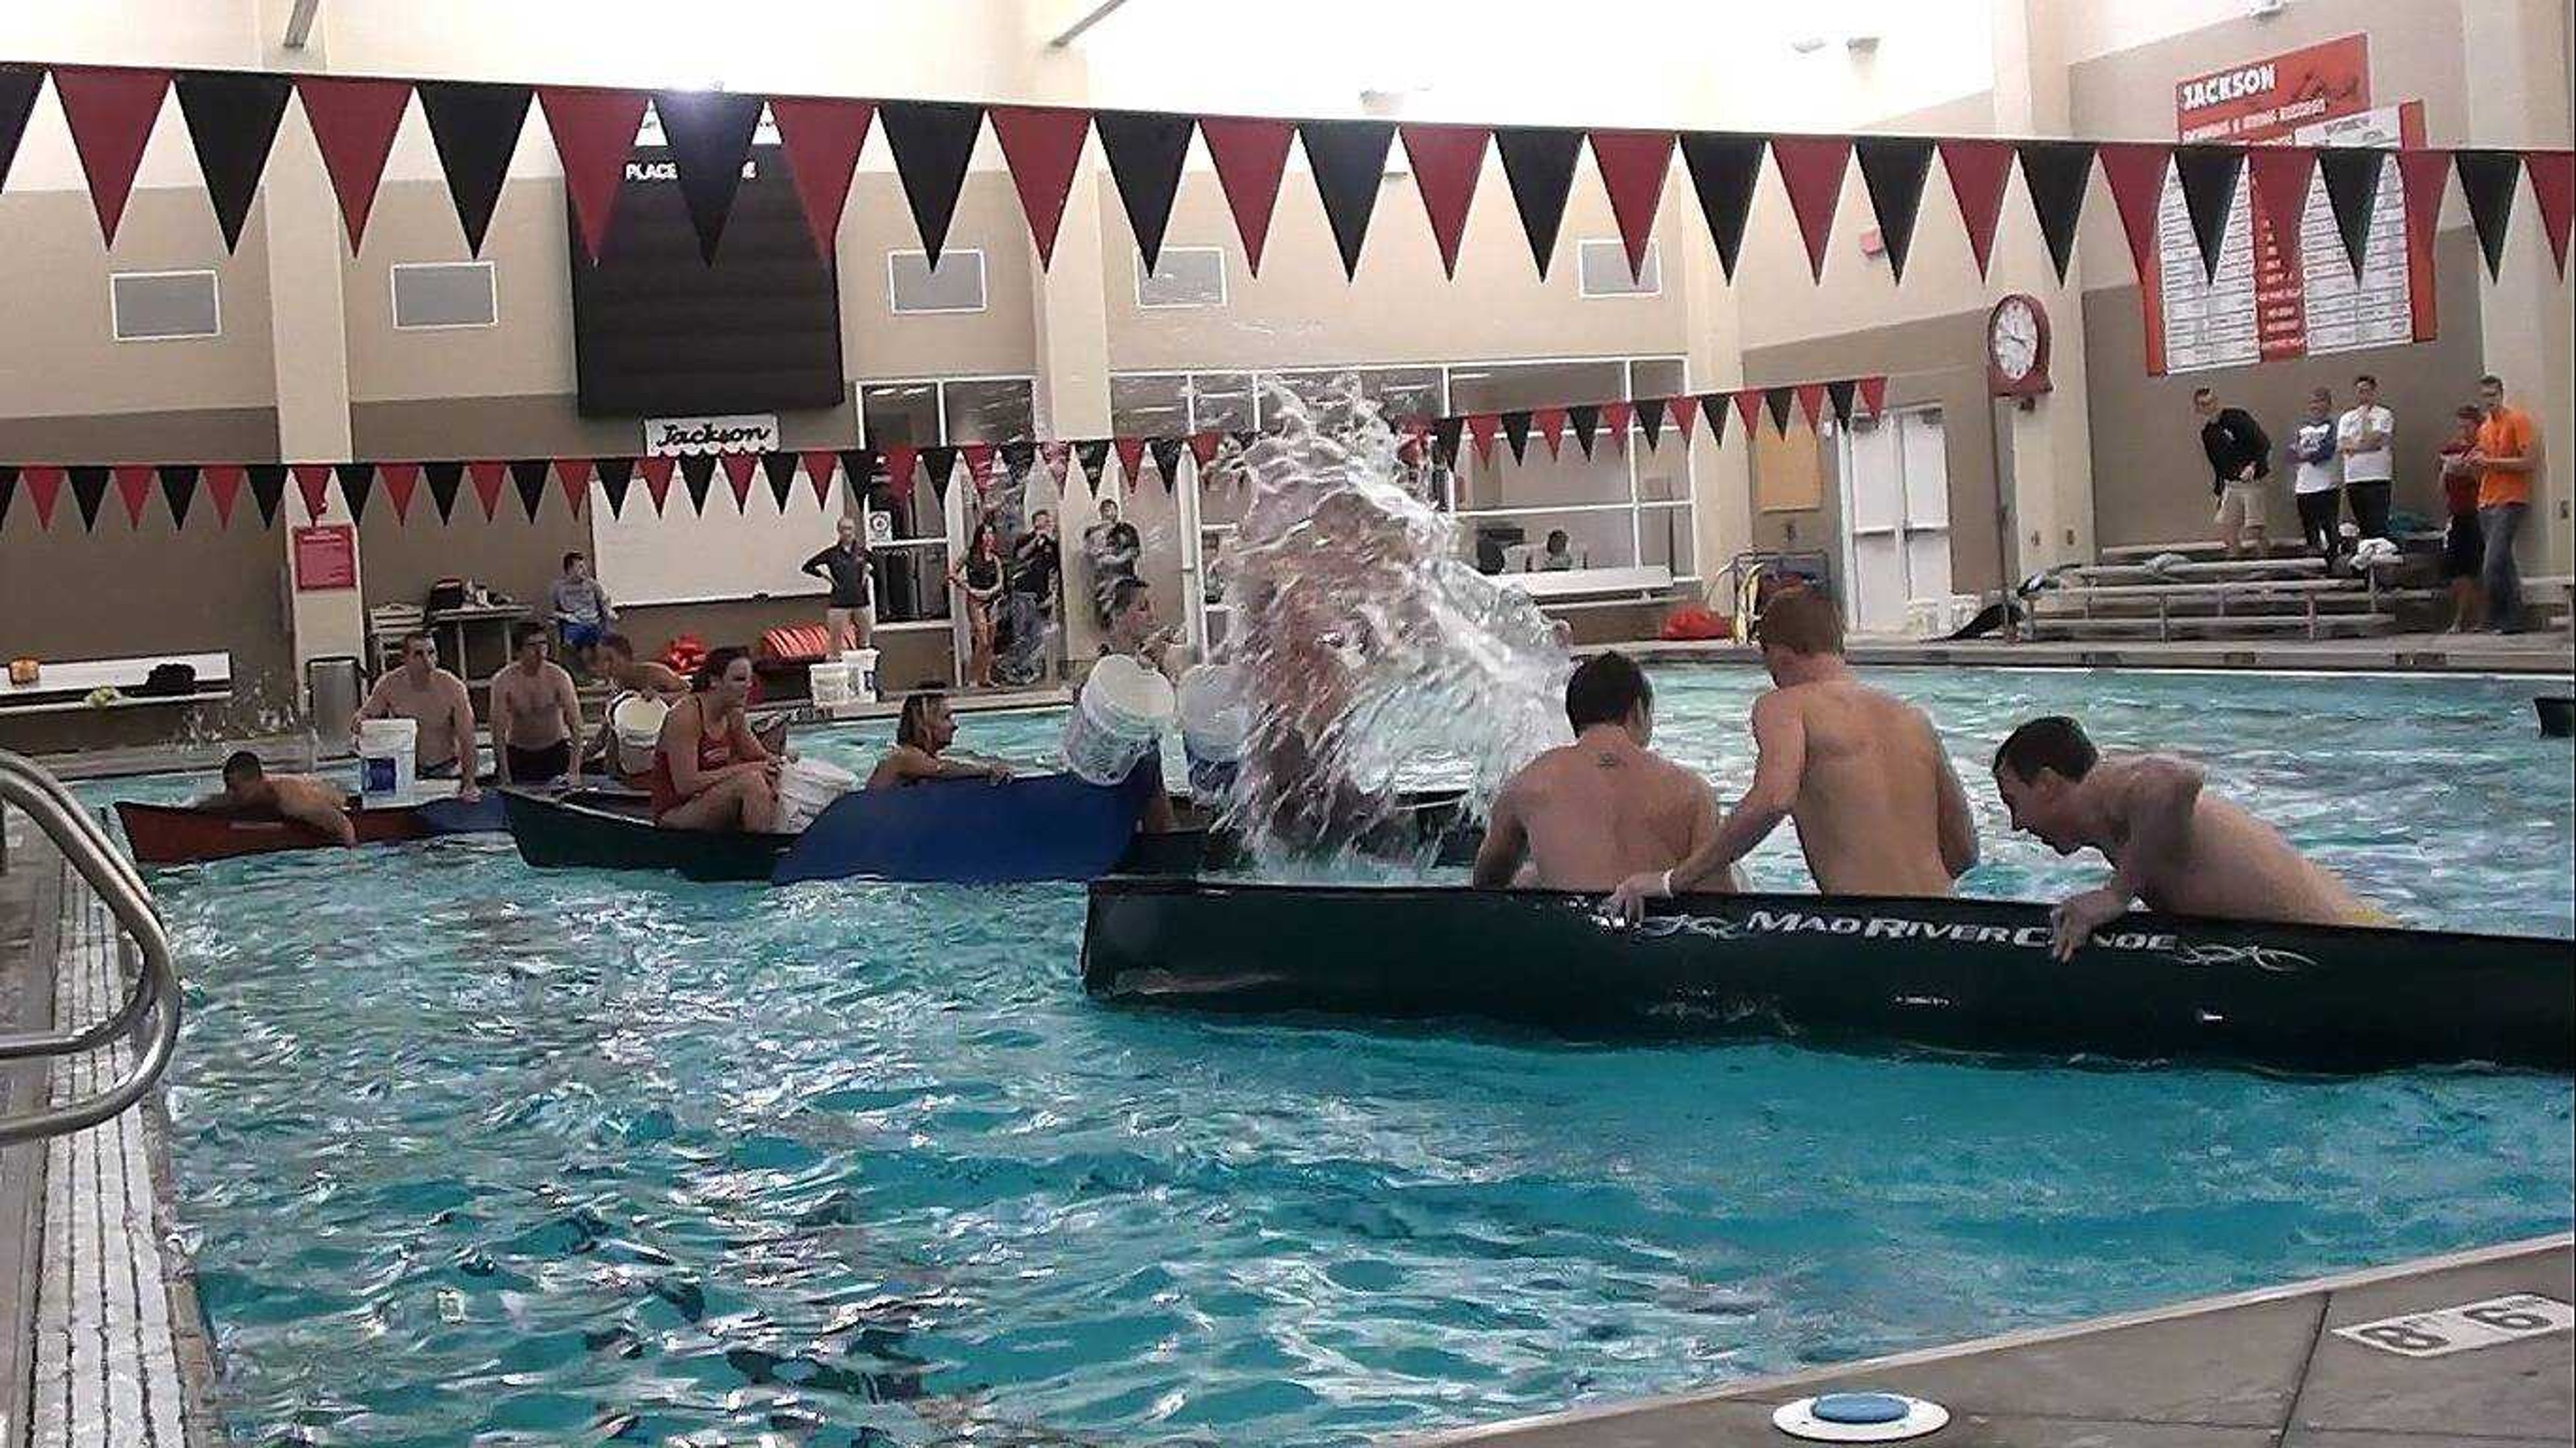 <b>Contestants try to sink canoes during the battleship event <br>
on Oct. 8, 2012.</b> Photo by Kyle Theis